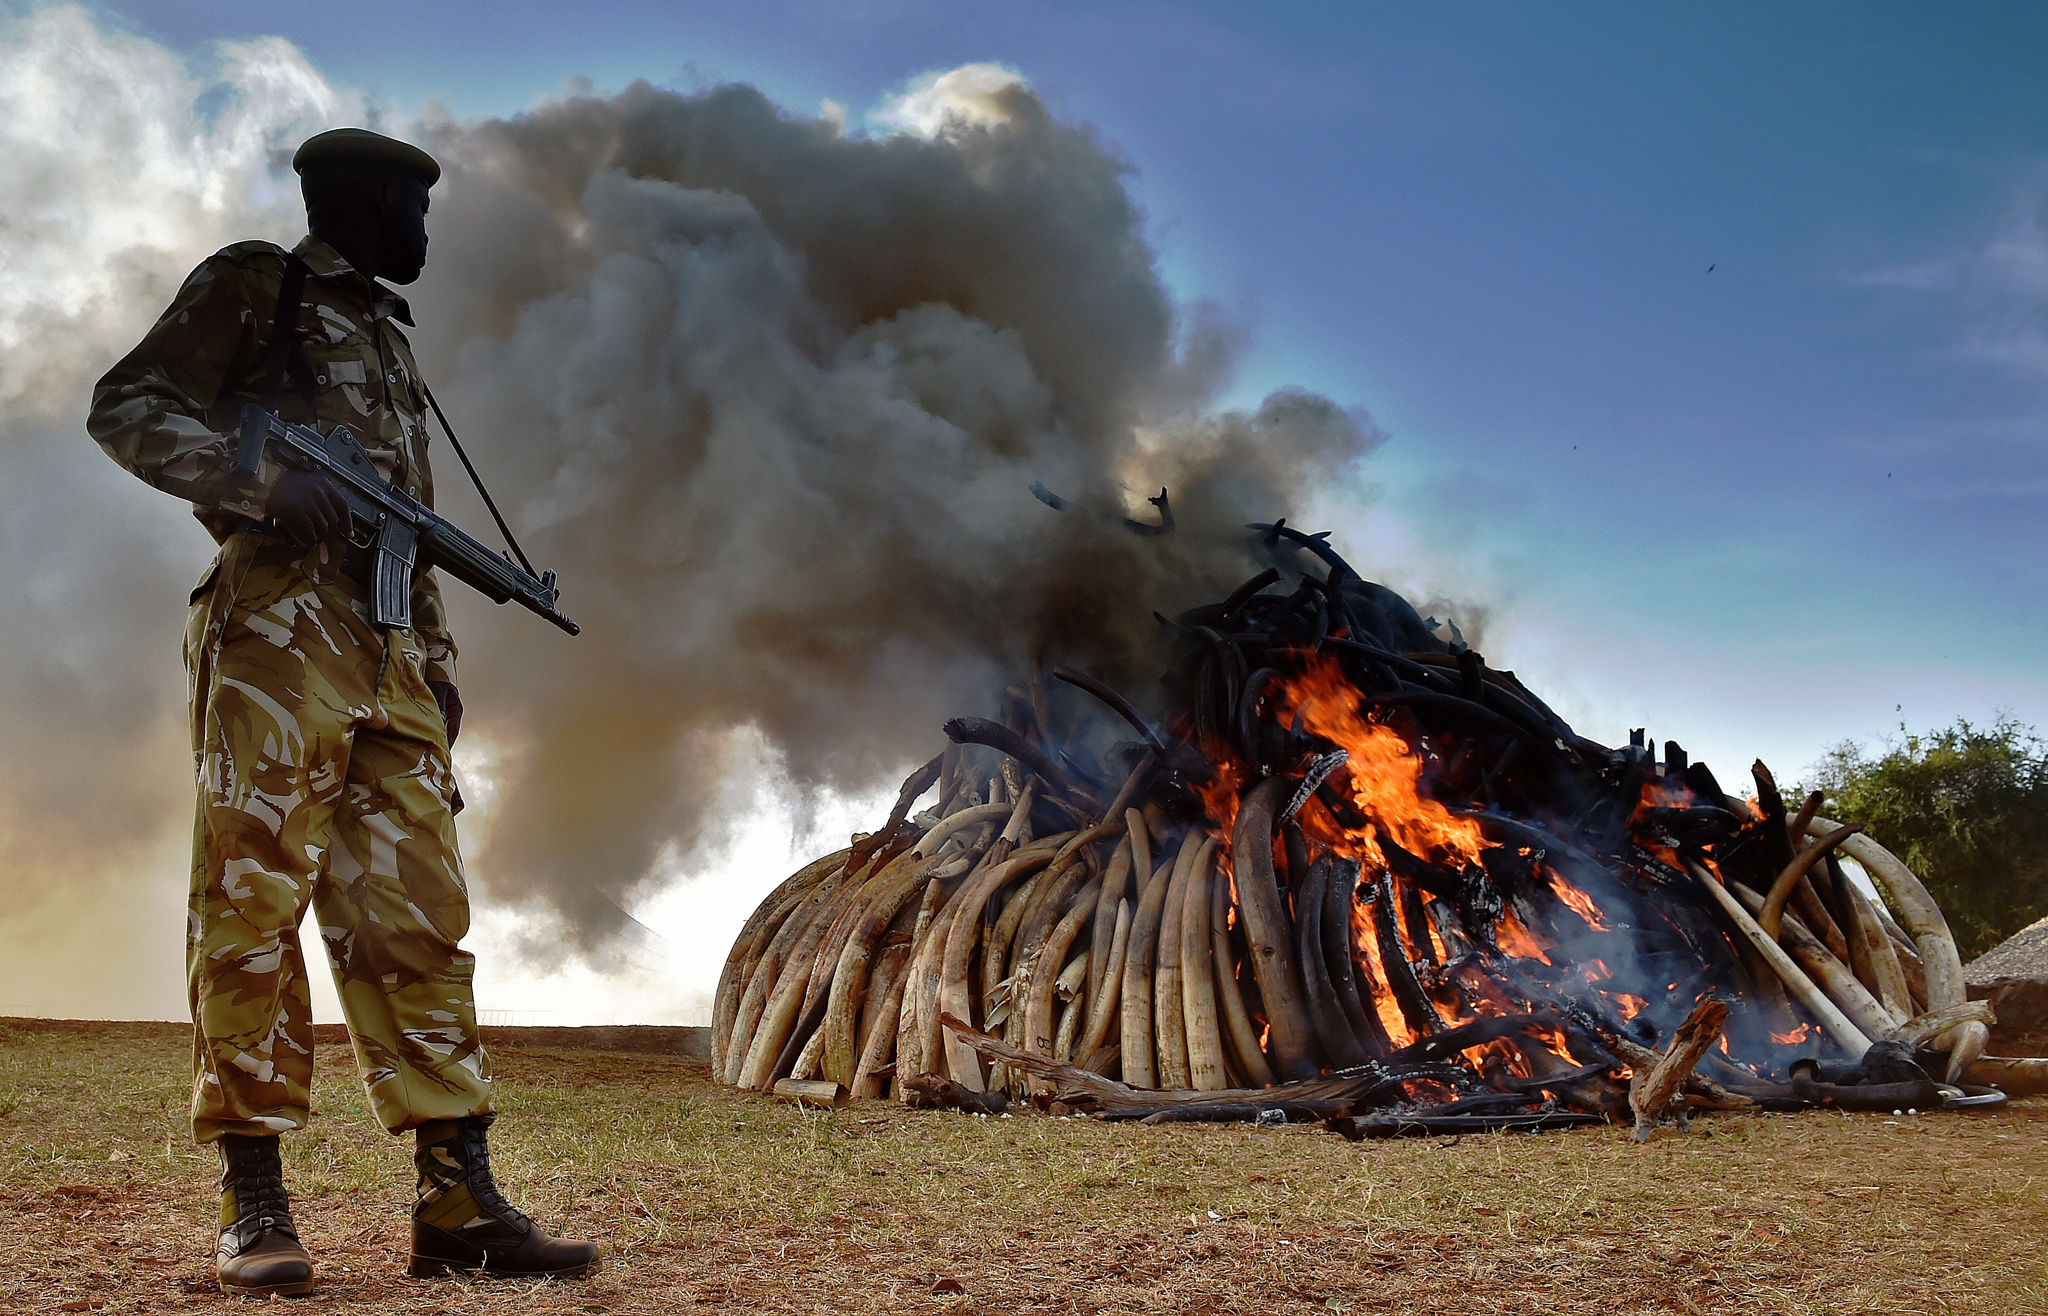 A Kenyan wildlife officer stands by 15 tonnes of burning ivory